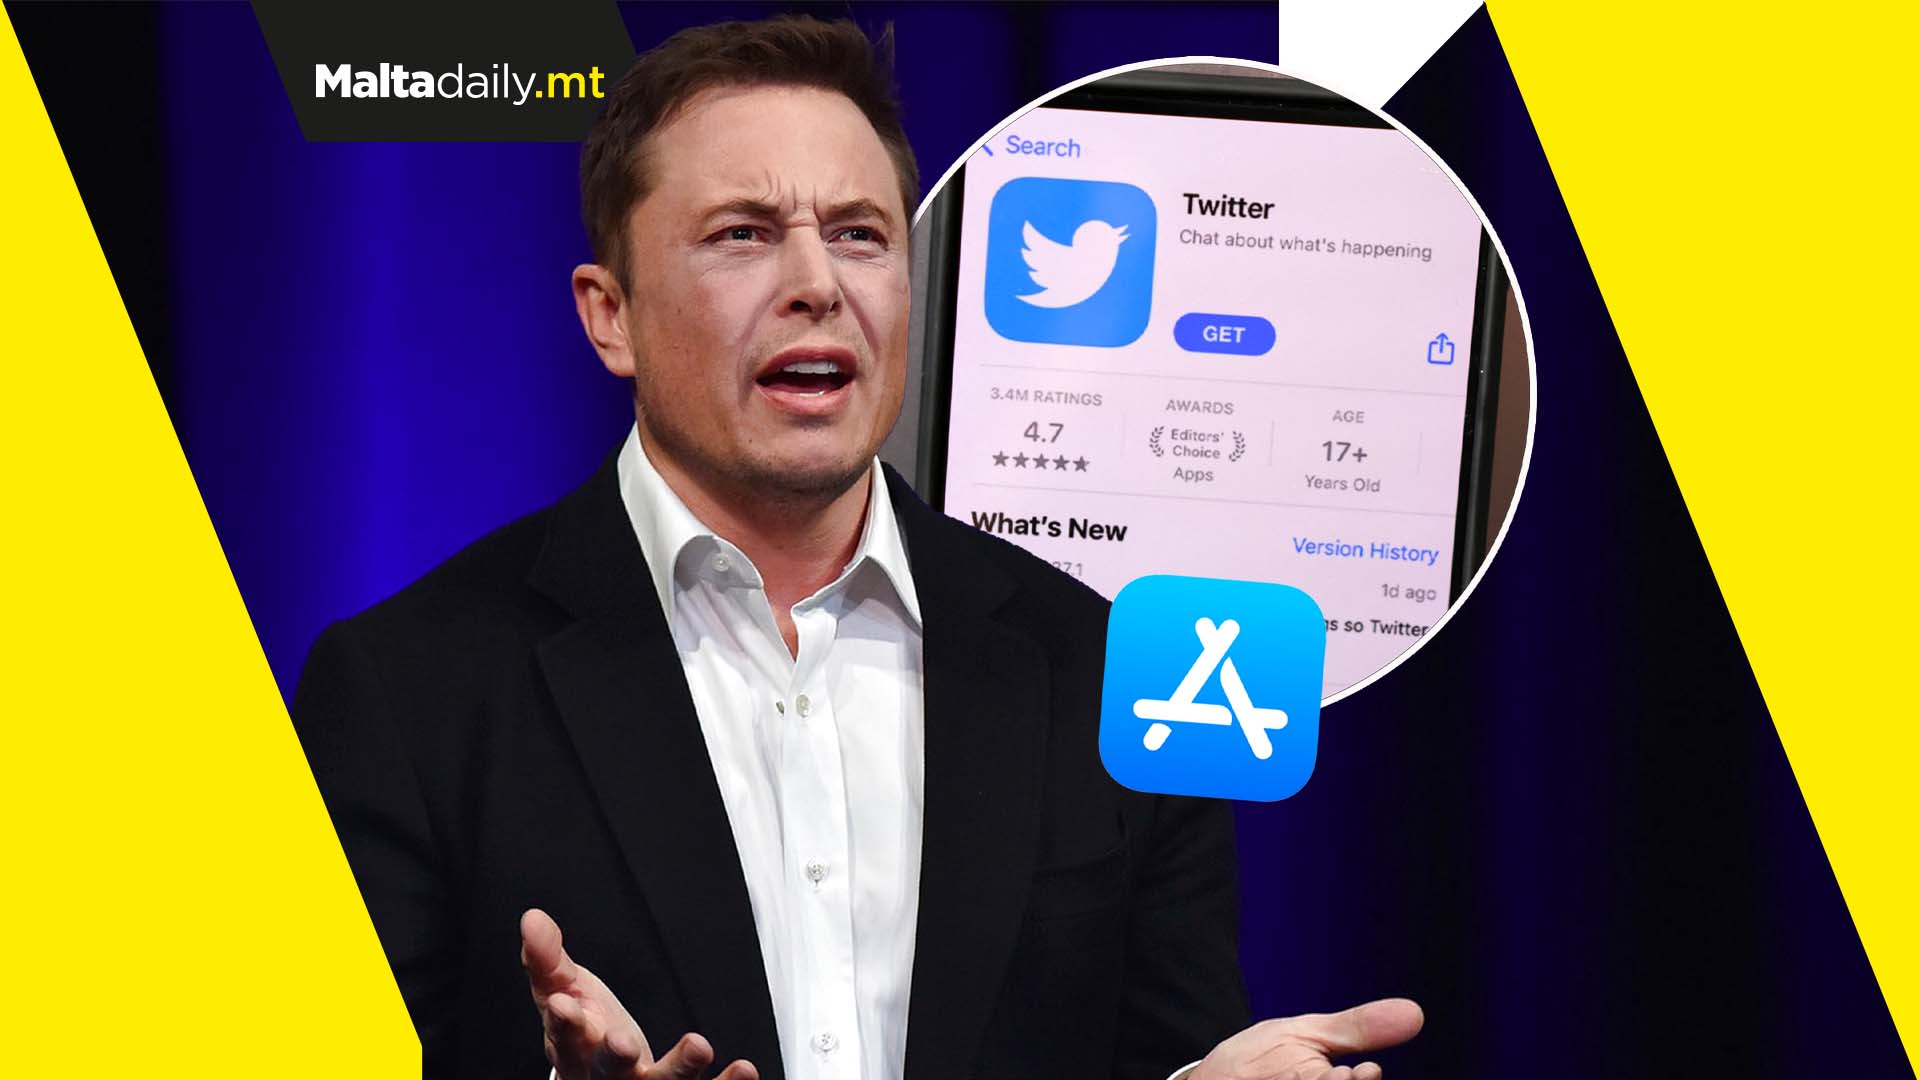 Twitter could be removed from App Store: Musk says he’ll create new phone